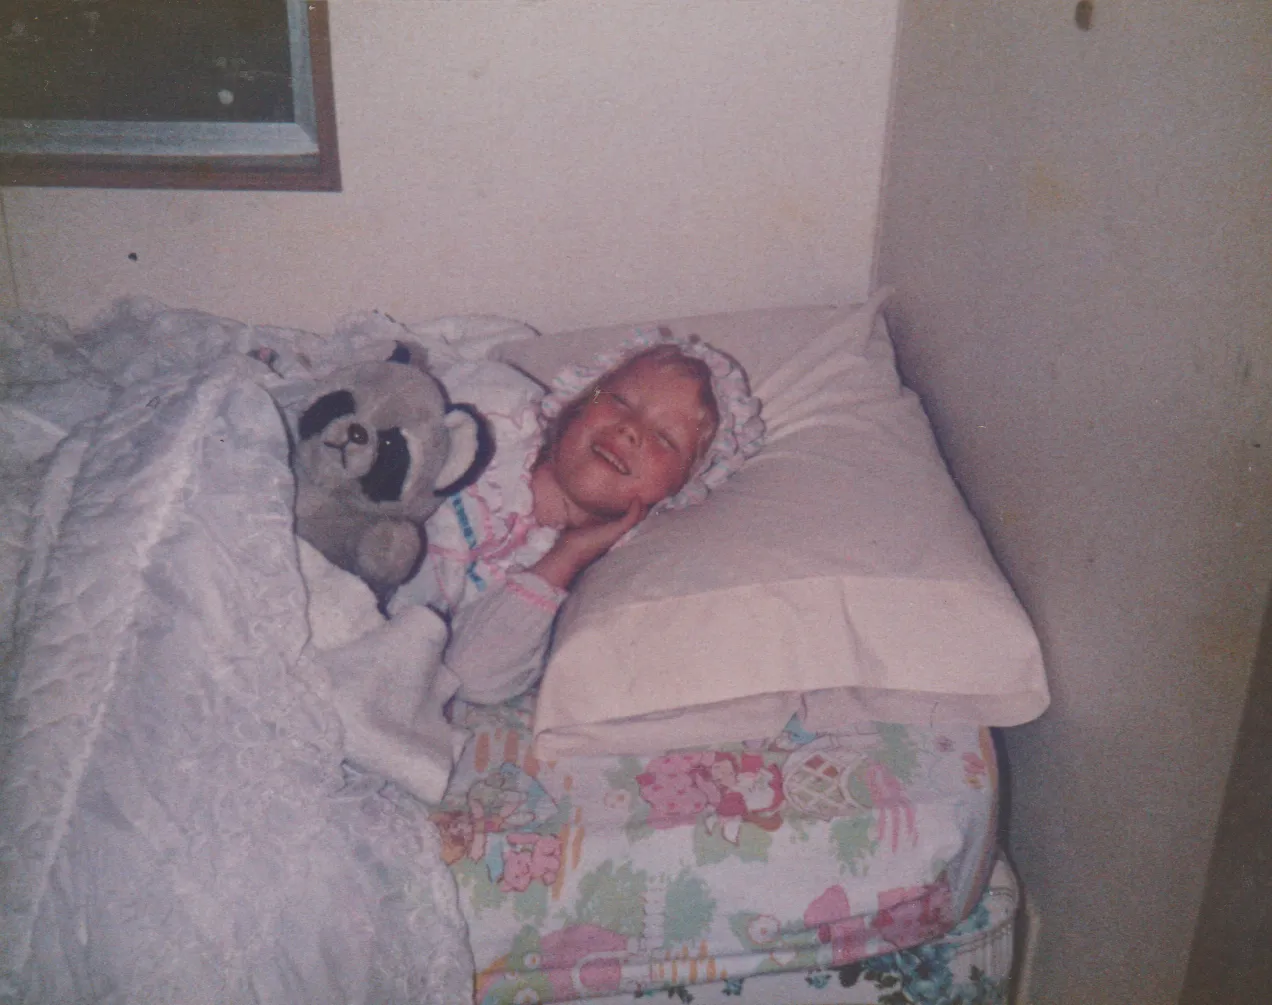 1989 maybe - Katie on her bed.png